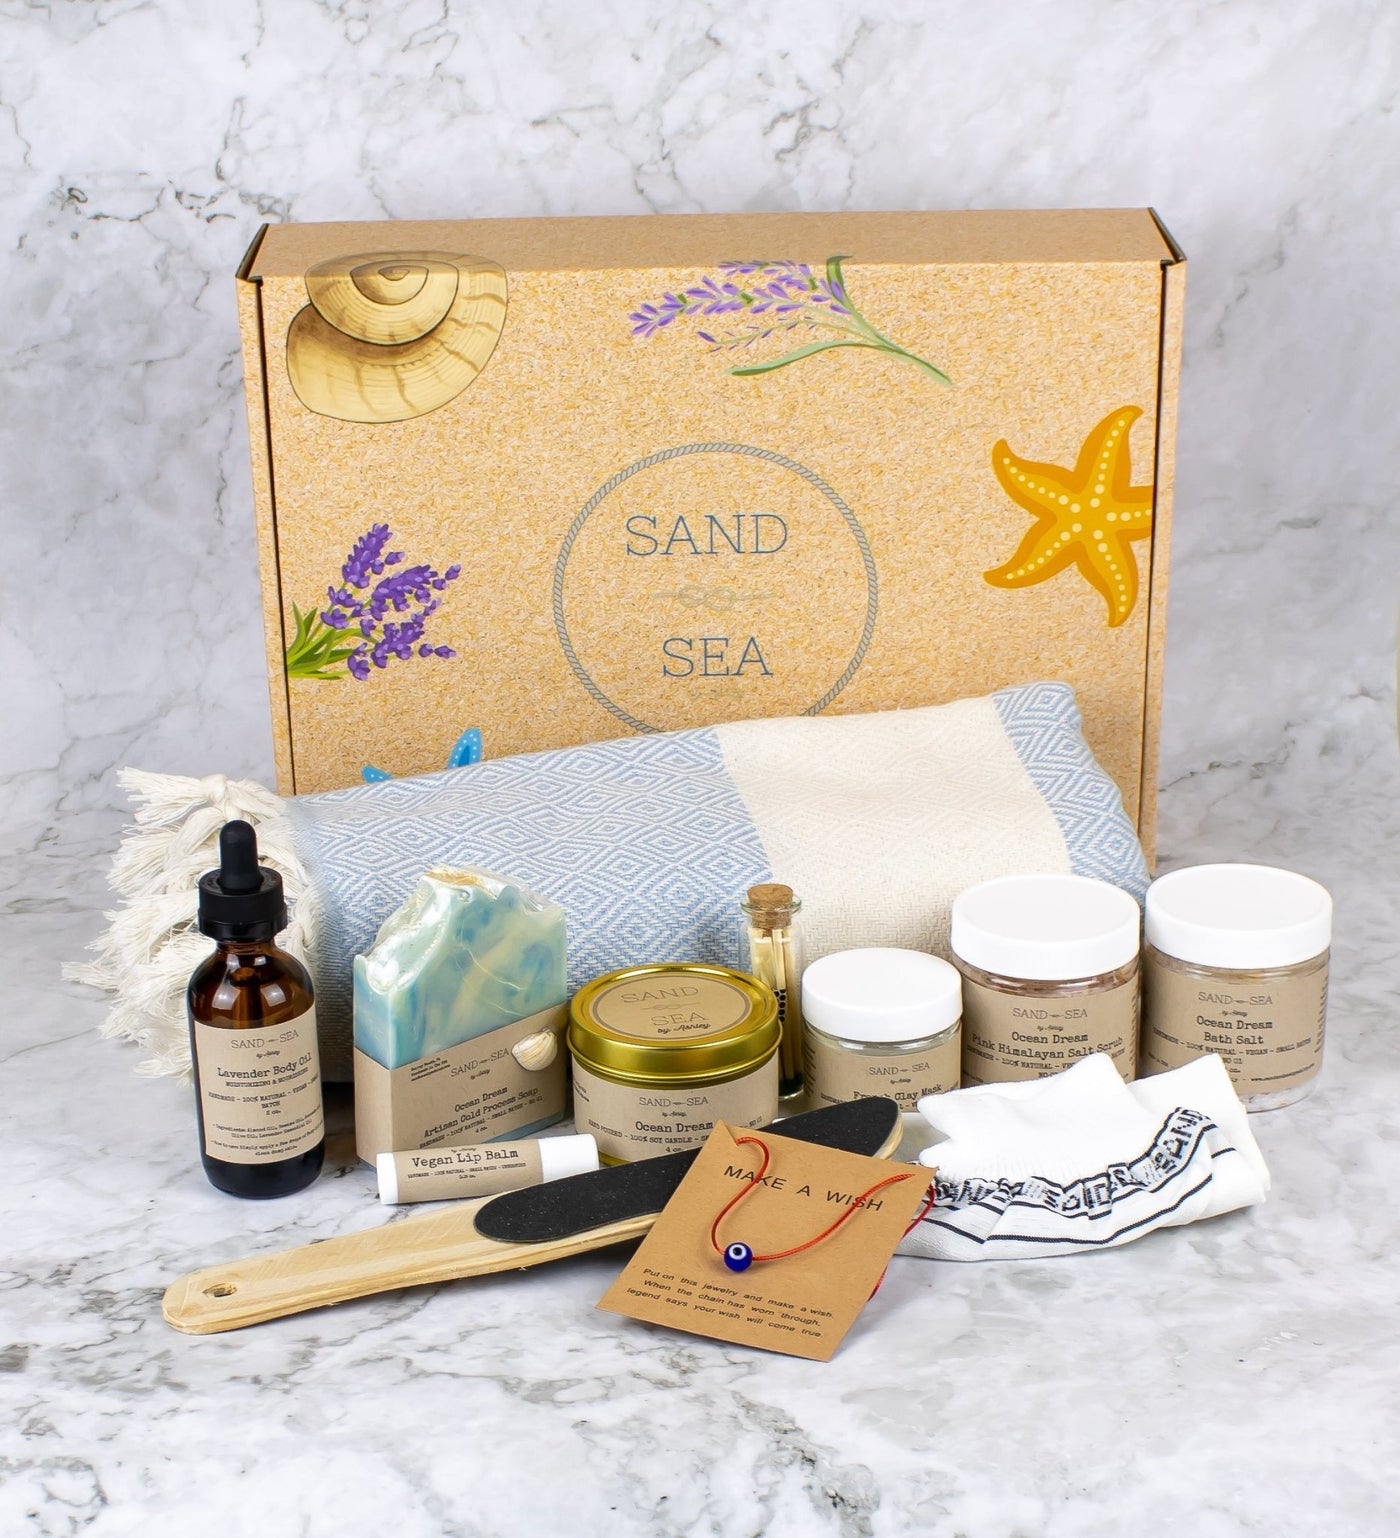 Best Mom Ever Mother's Day Spa Gift Set with Turkish Beach Towel - Relaxing, Destress, Ocean Dream Skin Care Package for Mom 13 pcs - Sand & Sea by Ashley